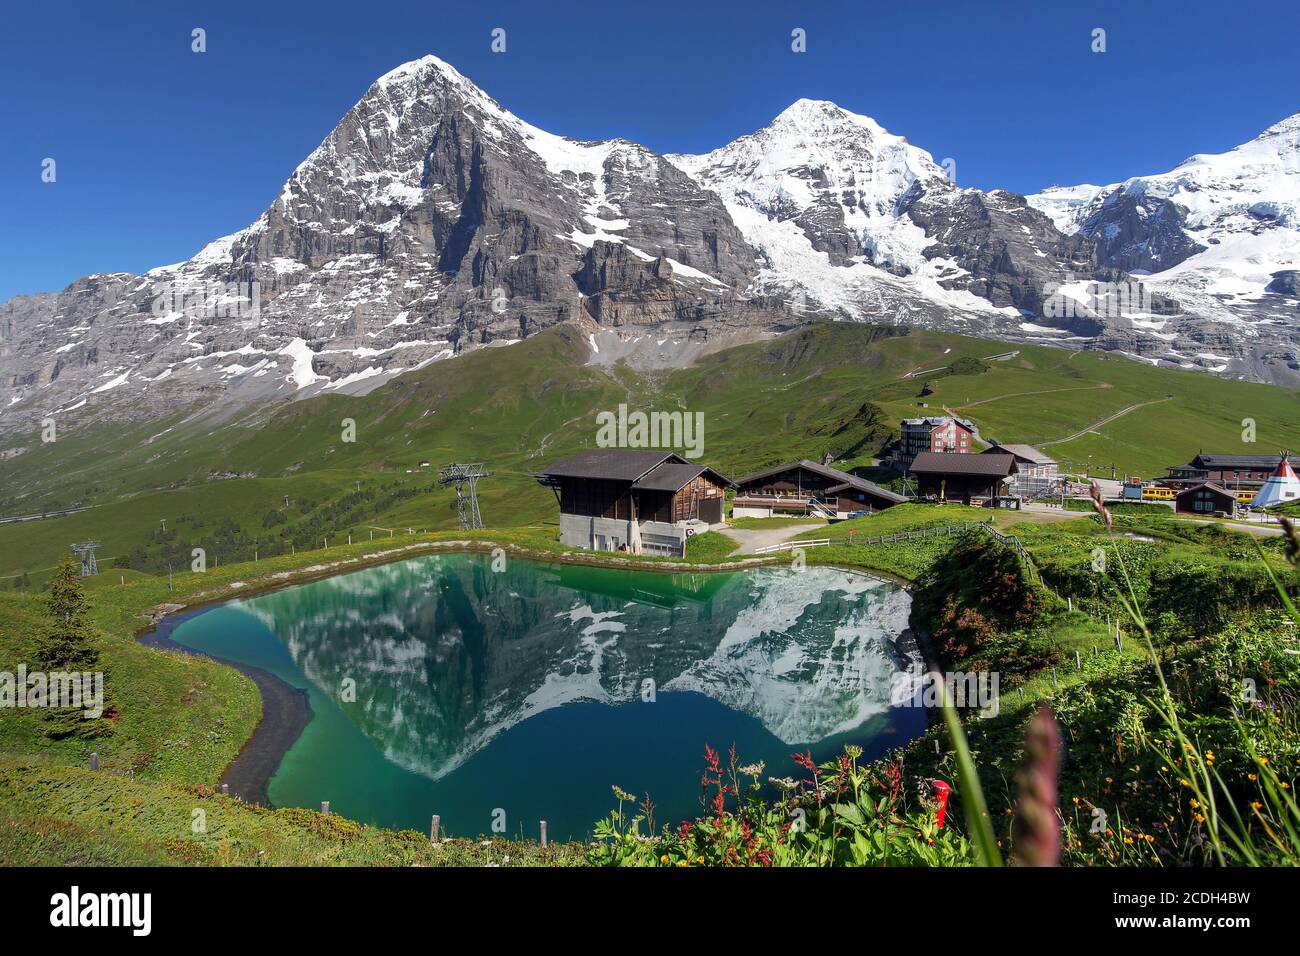 Landscape with Eiger, Moench and part of Jungfrau (to the right), in the Swiss Alps (Bernese Alps) reflecting in a pond at Kleine Scheidegg. Stock Photo